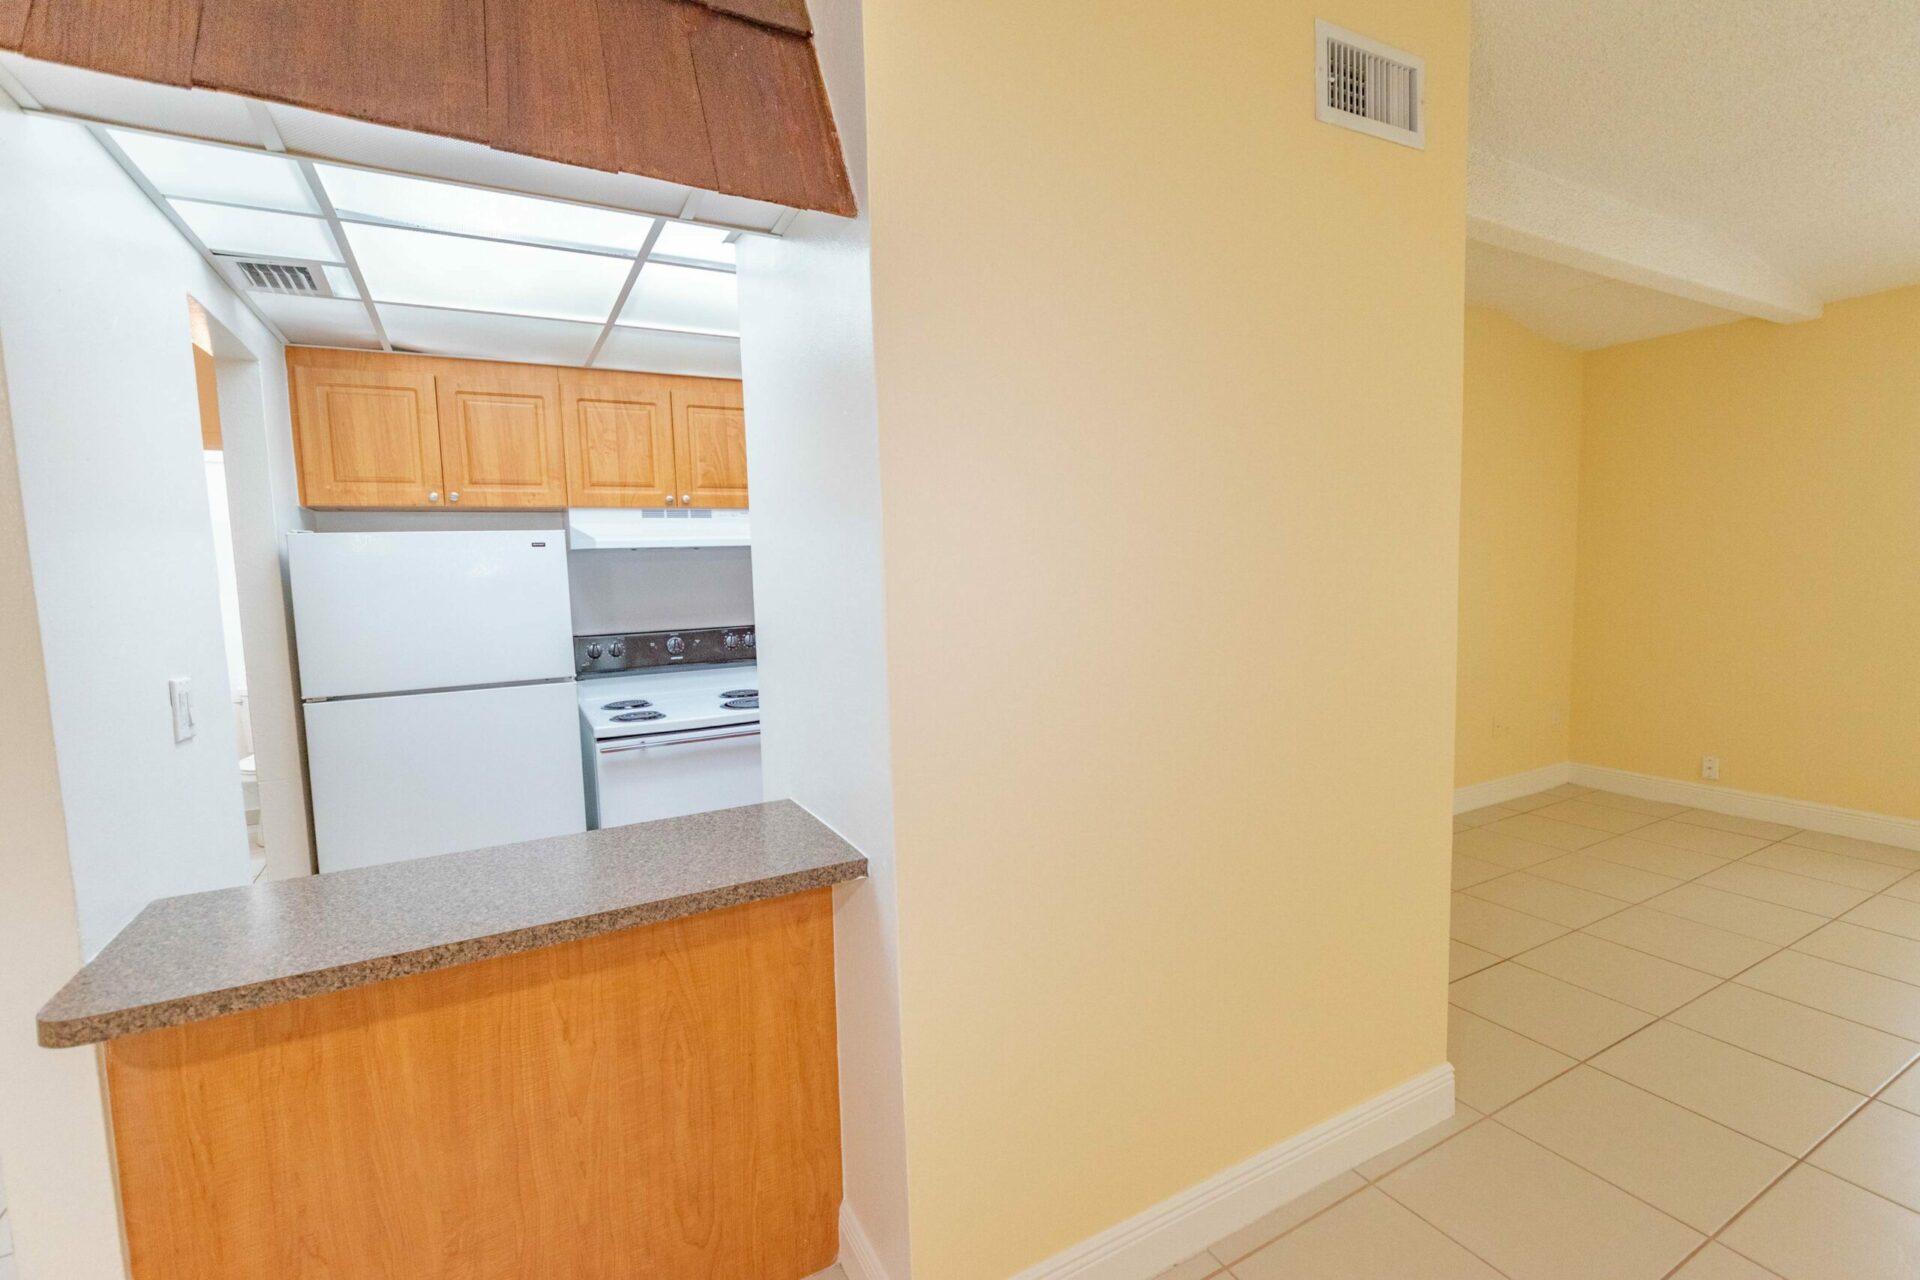 Spacious living and dining area with a counter and kitchen in an apartment.